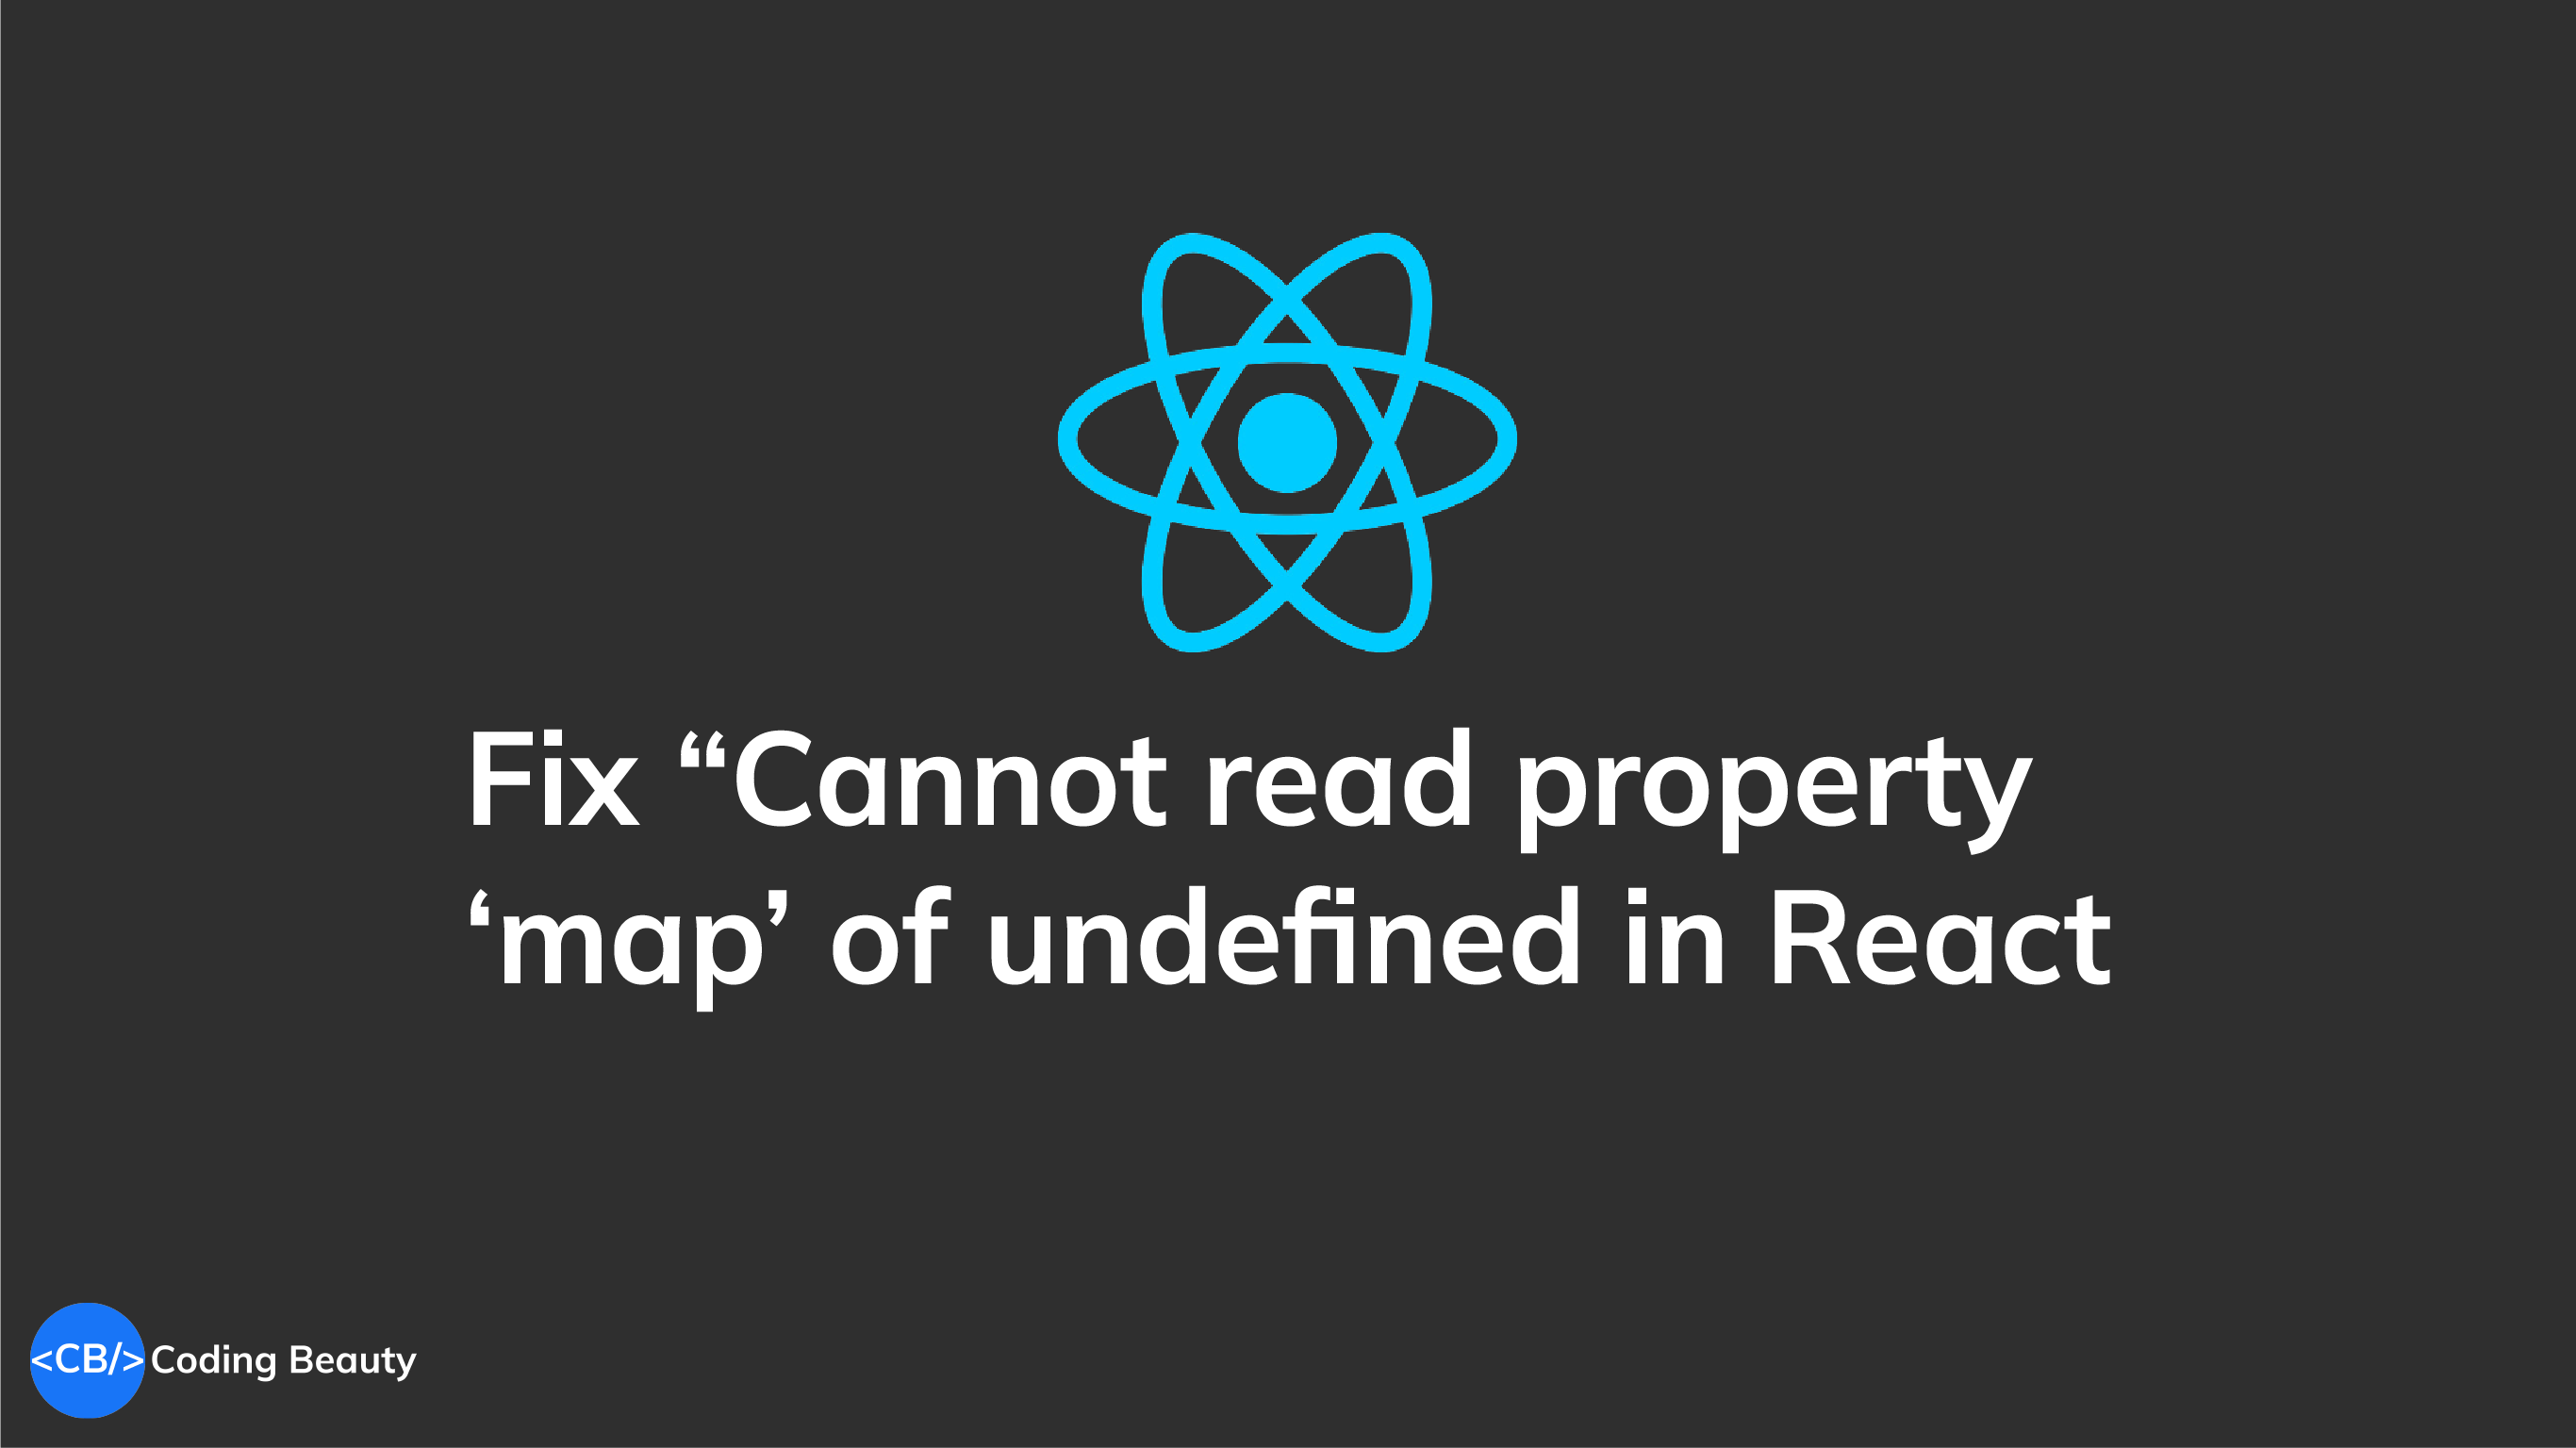 Fix "Cannot read property 'map' of undefined" in React